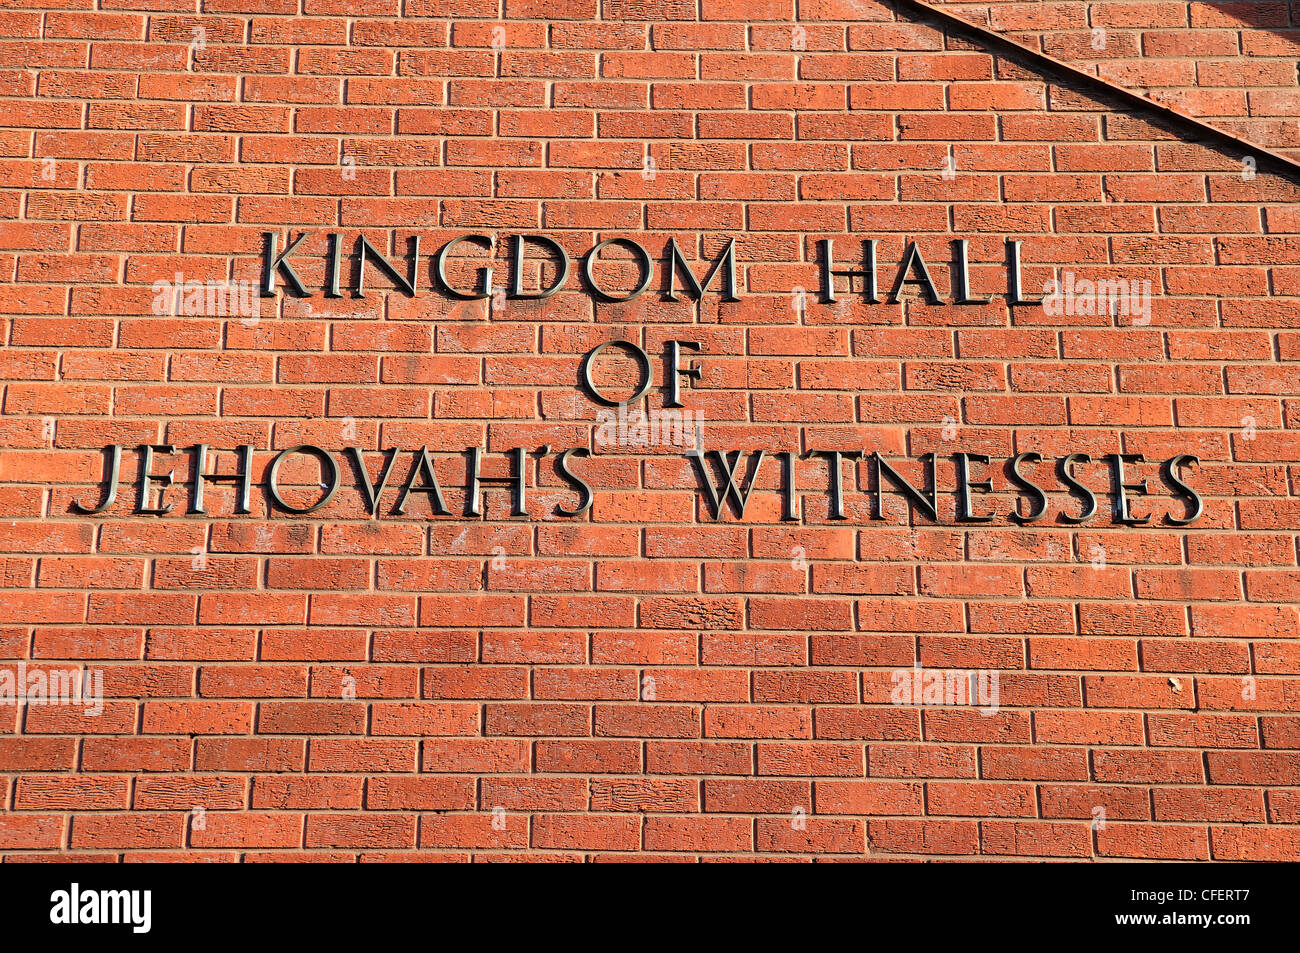 King Hall Of Jehovah's Witnesses.Steep Hill Lincoln England. Stock Photo